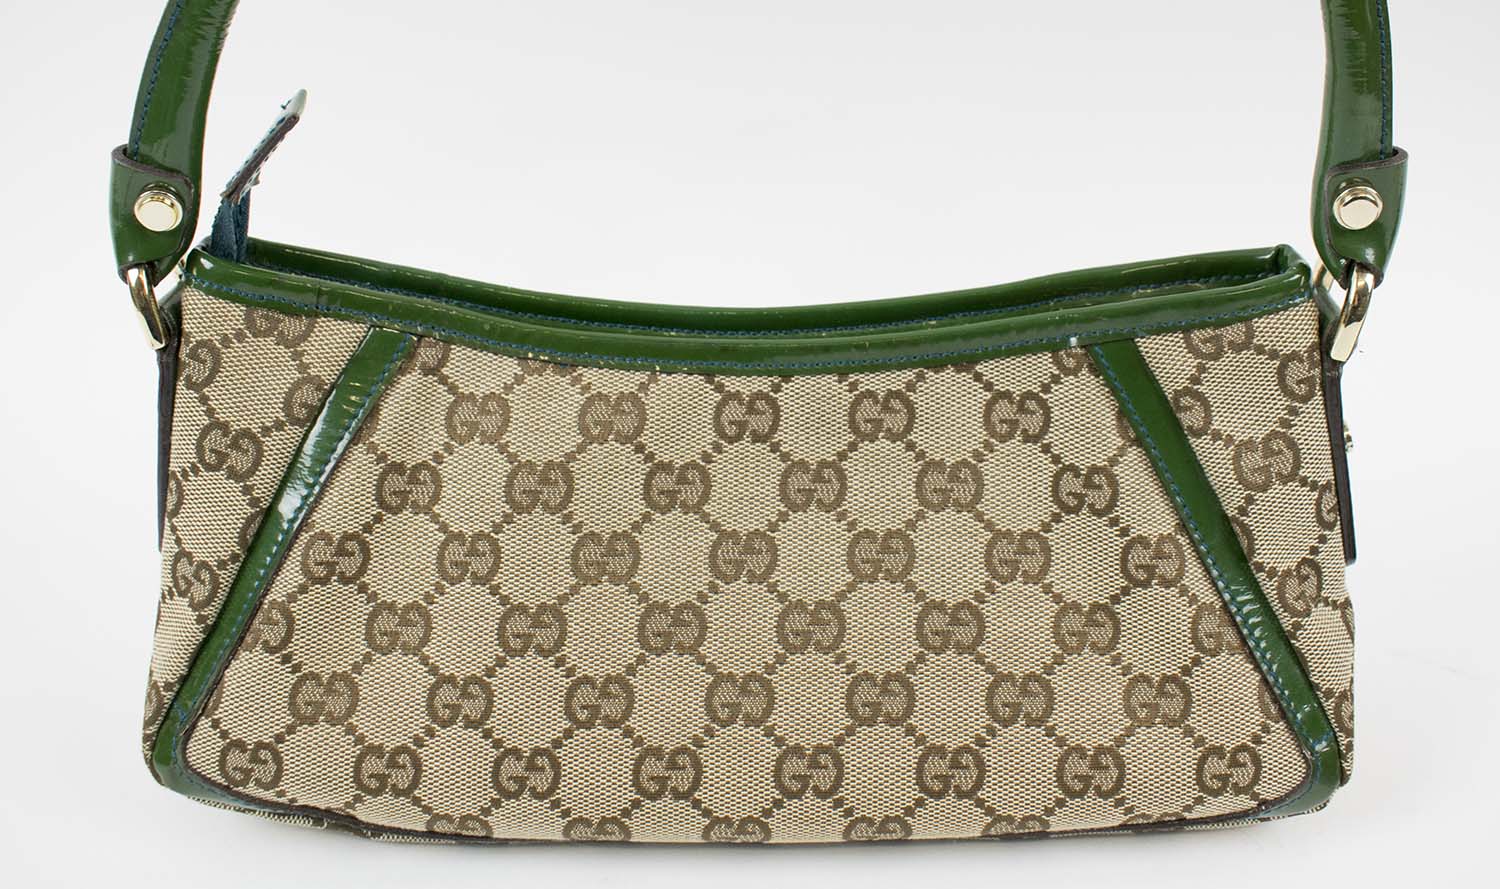 Sold at Auction: GUCCI 'ABBEY' D-RING GG MONOGRAM CANVAS HOBO BAG